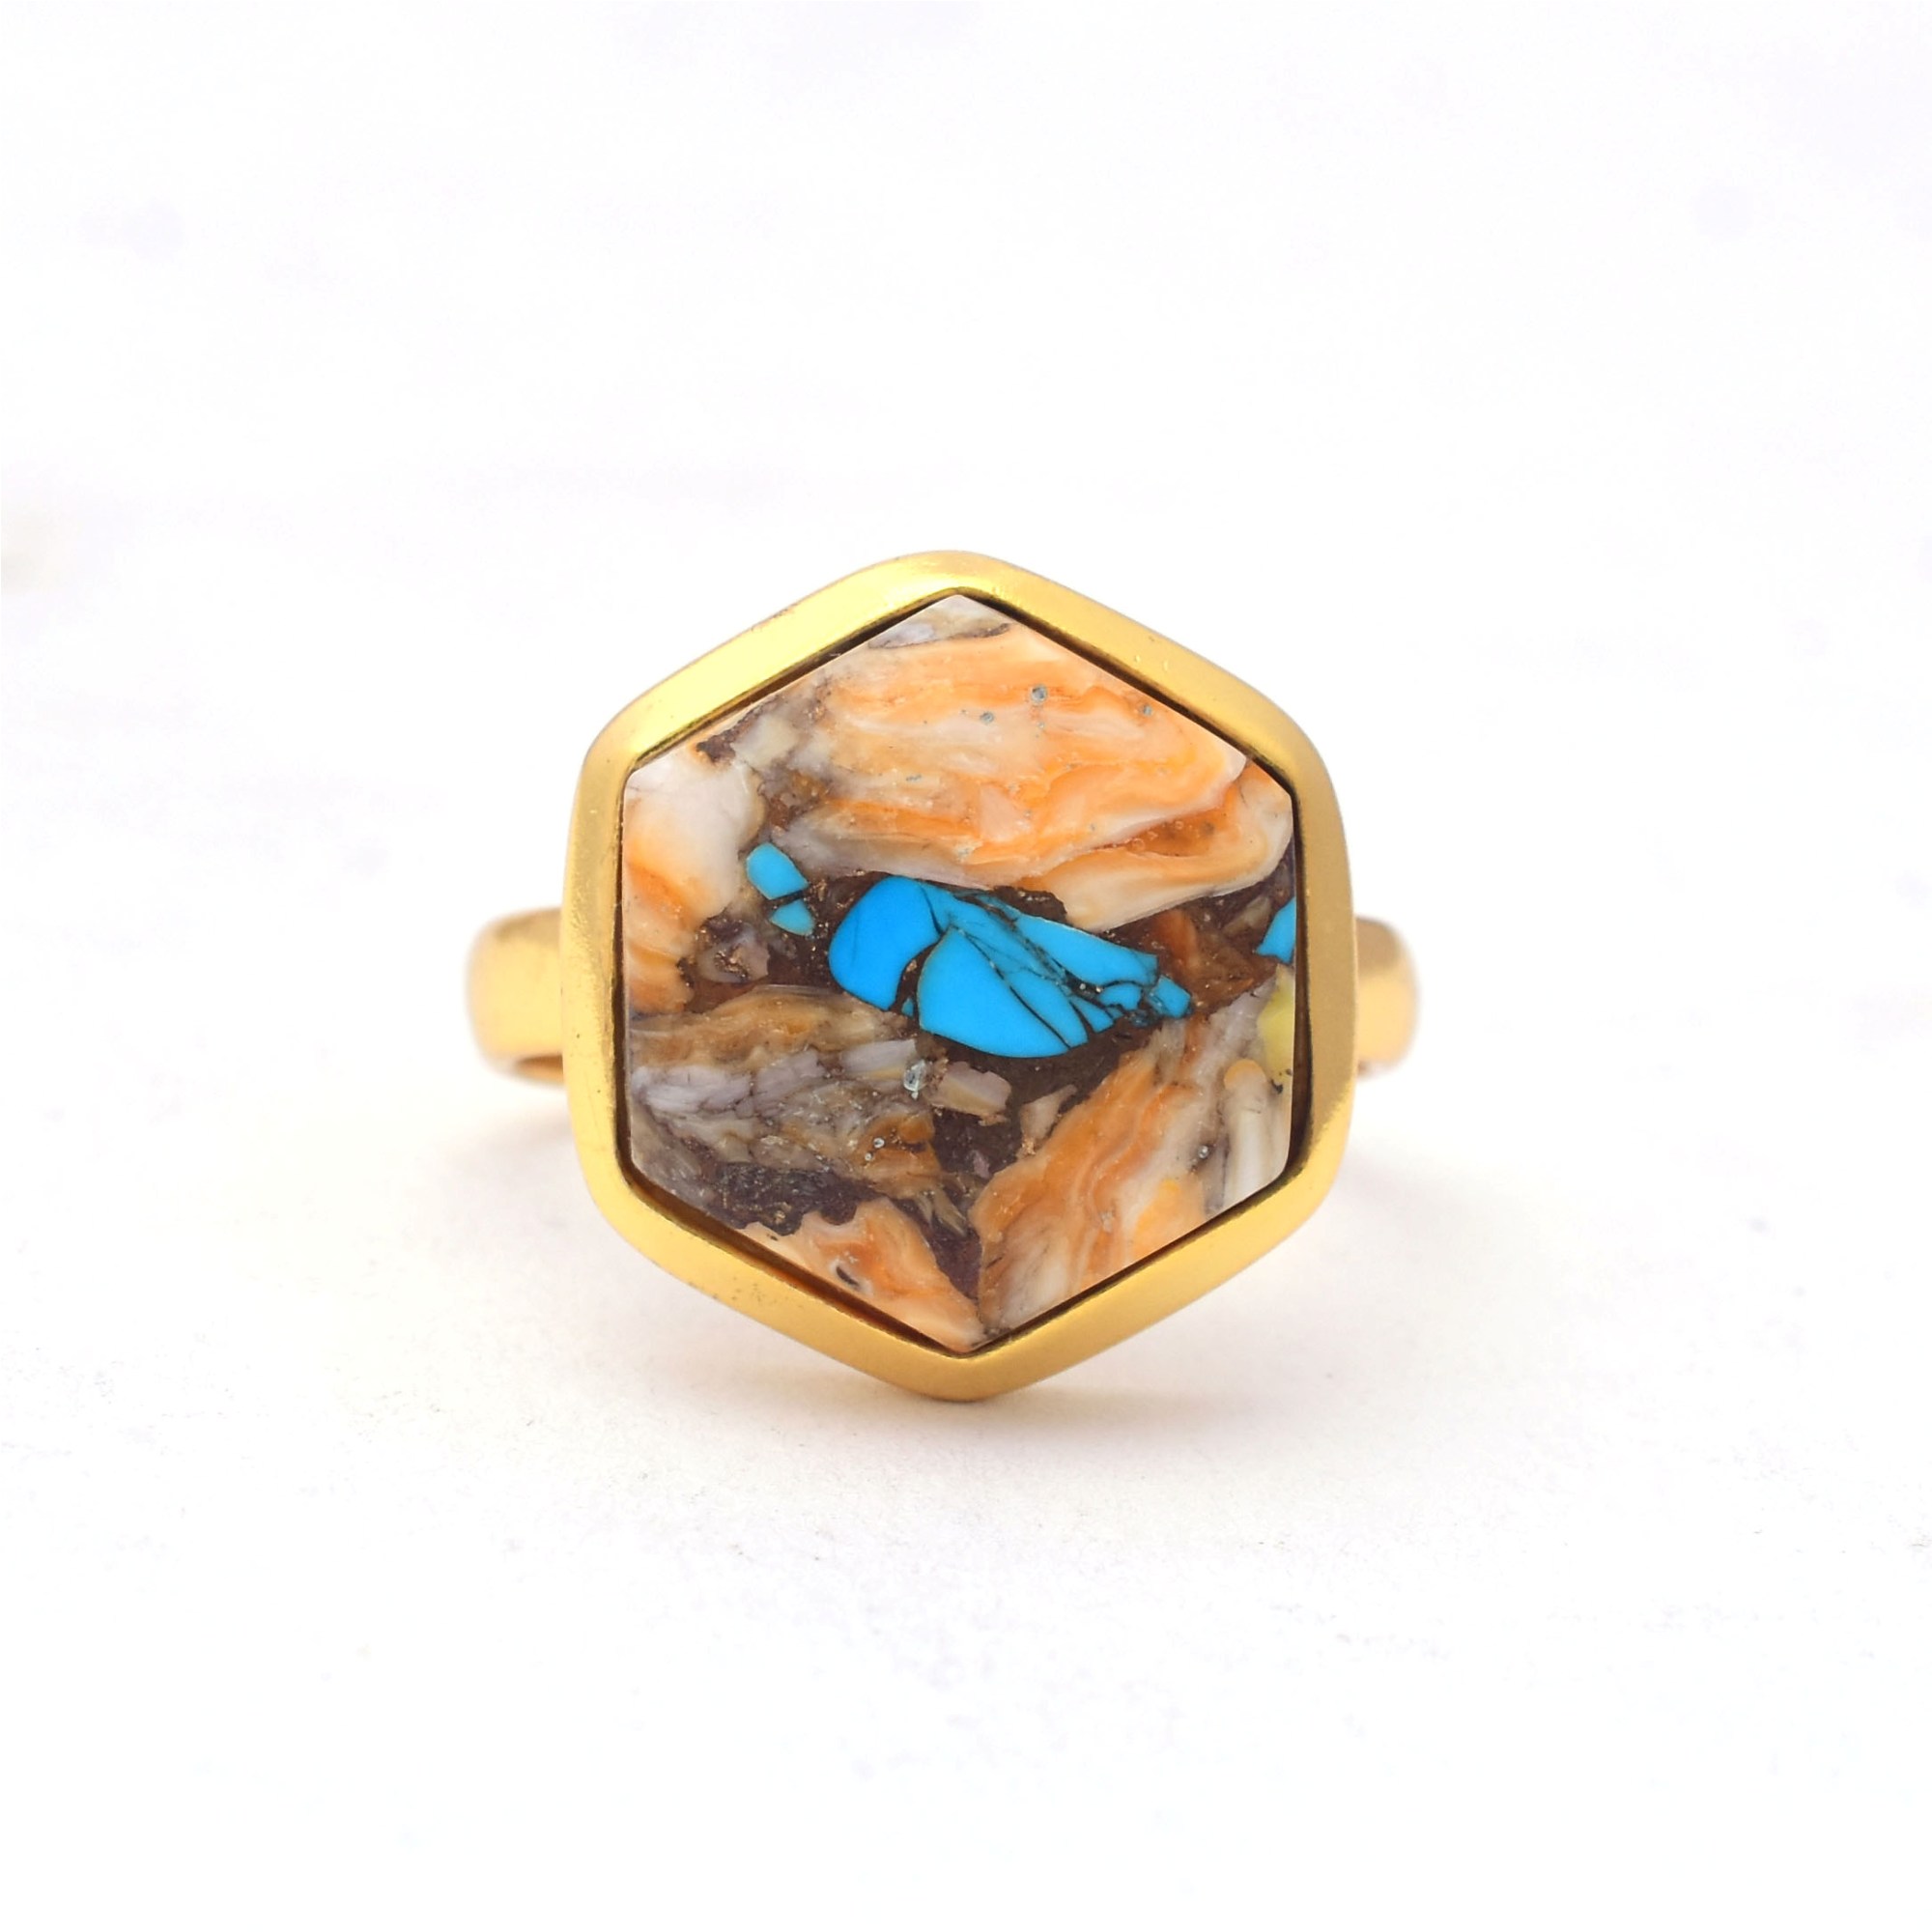 Fashion Jewelry Natural Oyster Copper Turquoise Ring 925 Solid Sterling Silver Statement Ring Jewelry Supply From India